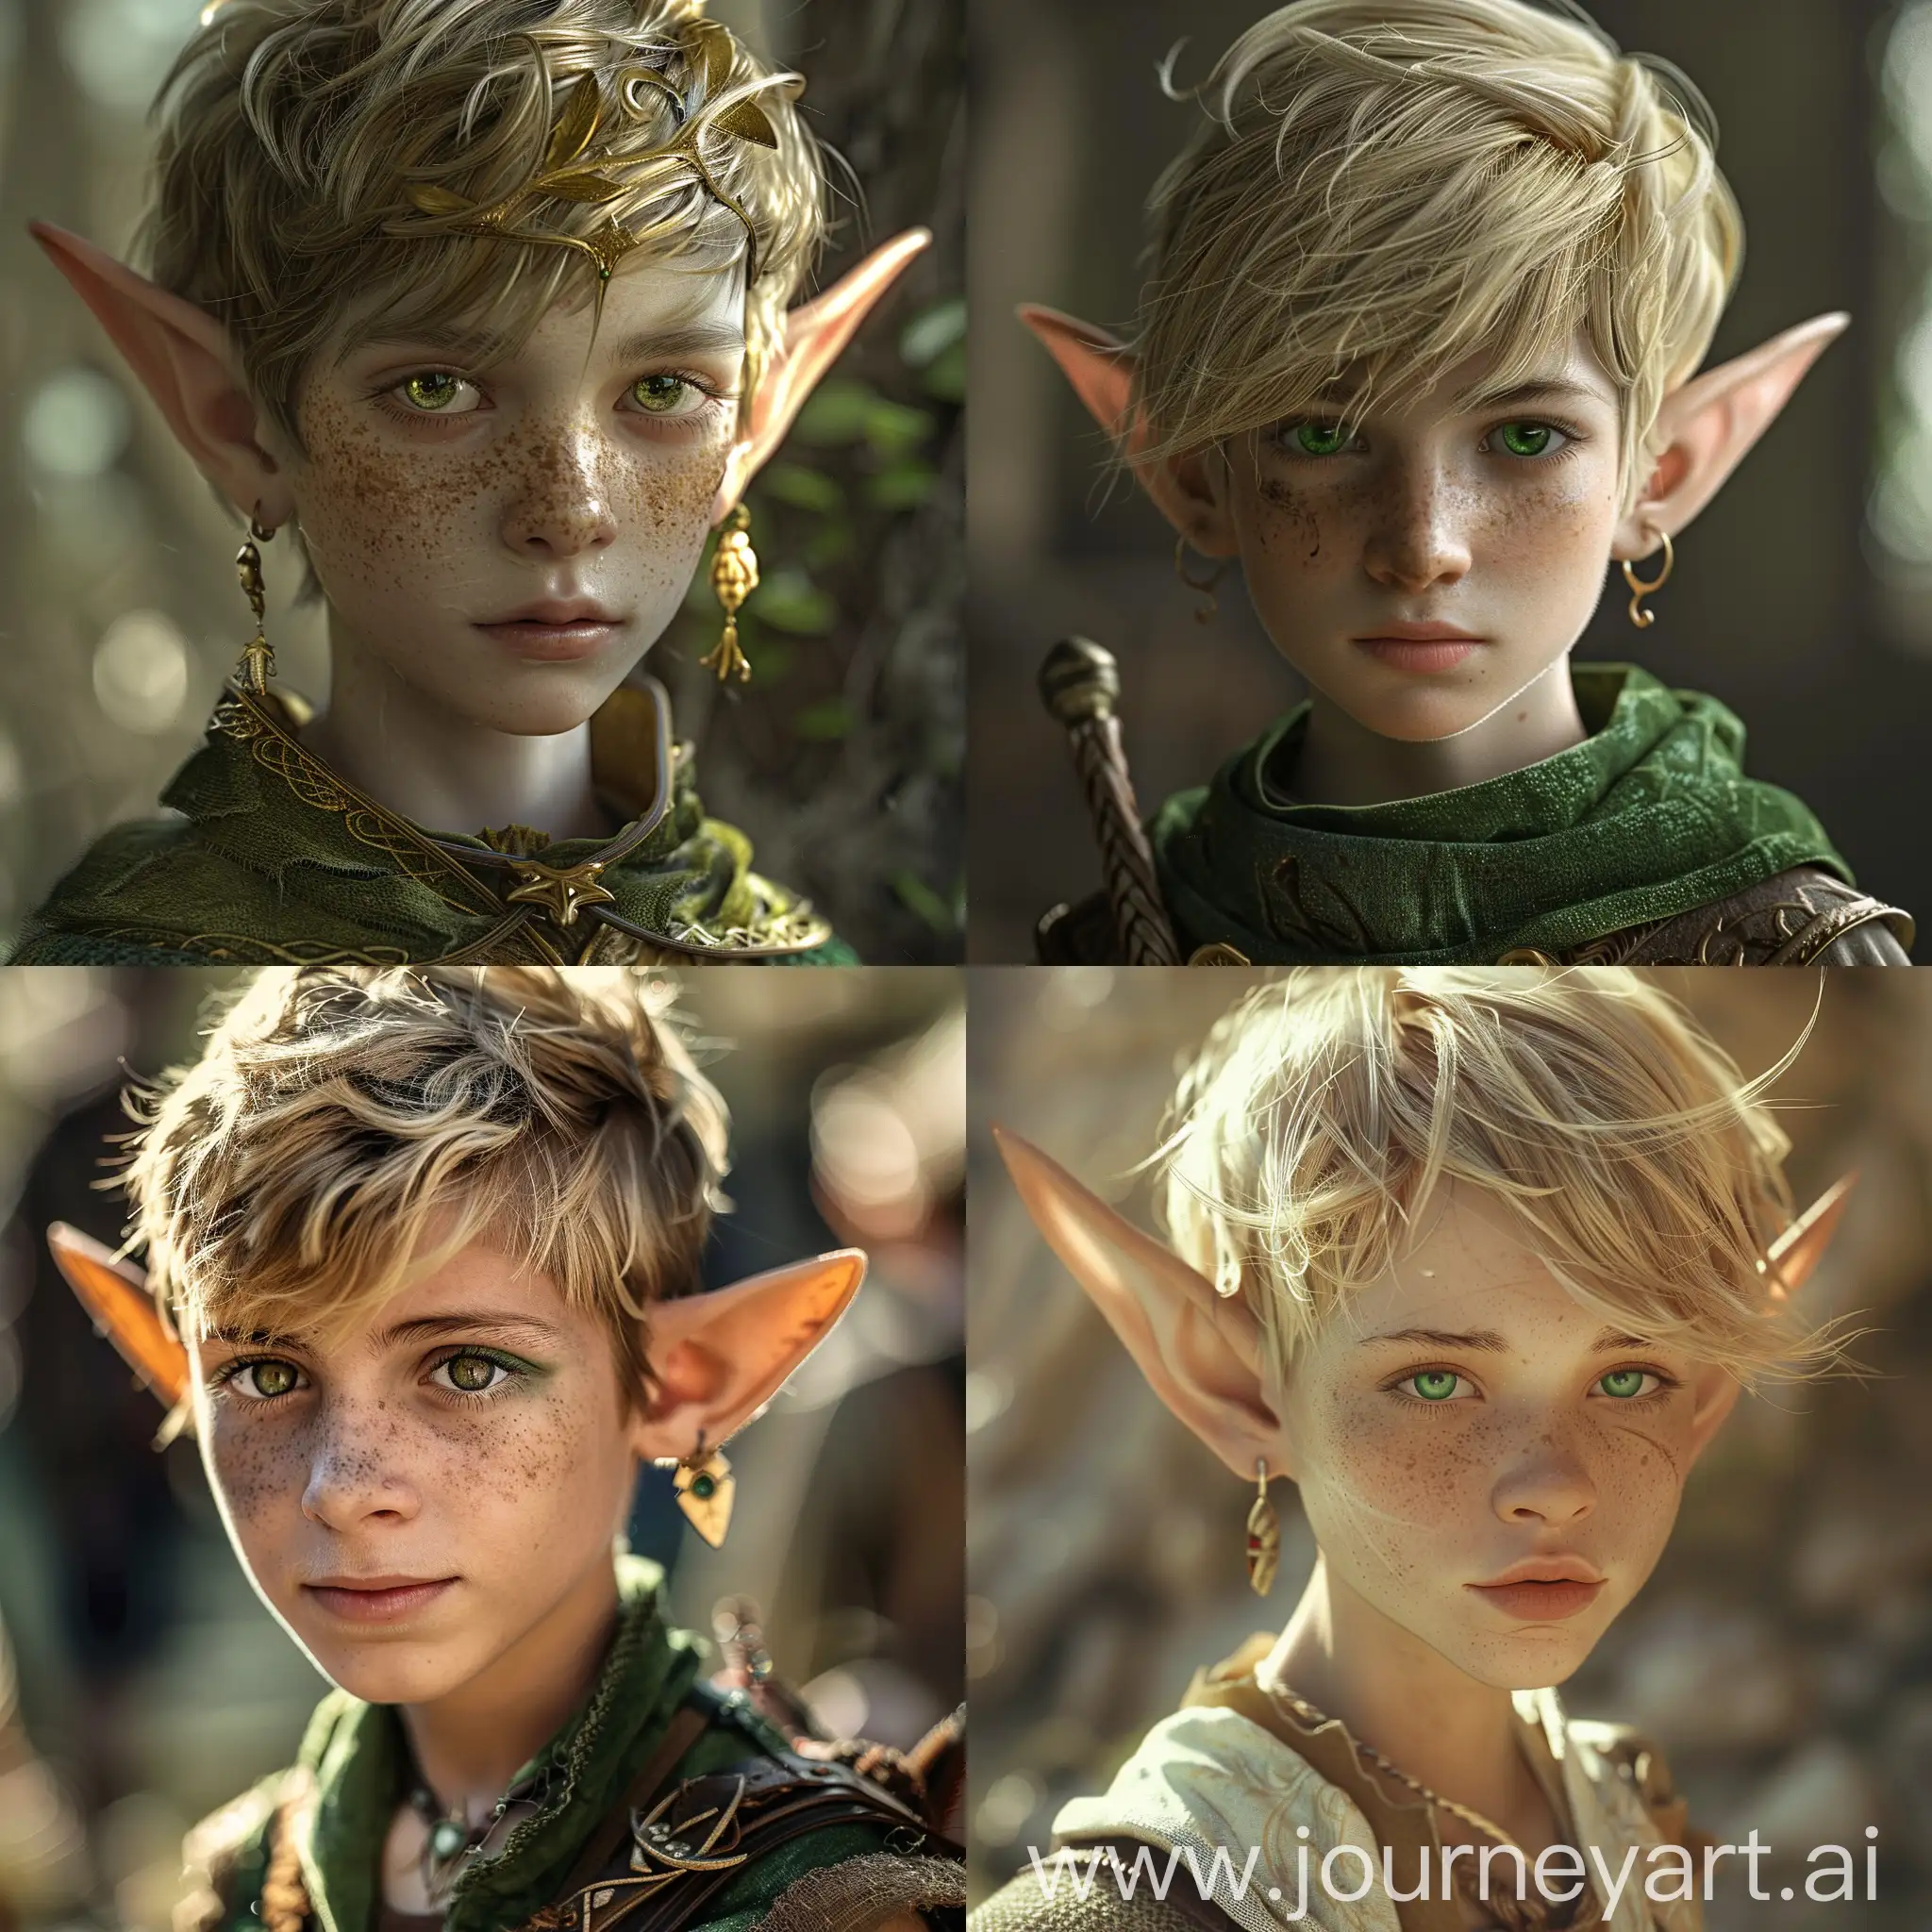 A young looking elf boy in a fantasy world, slightly more feminine face but still boy-looking, blond hair, green eyes, ussual male elf outfit